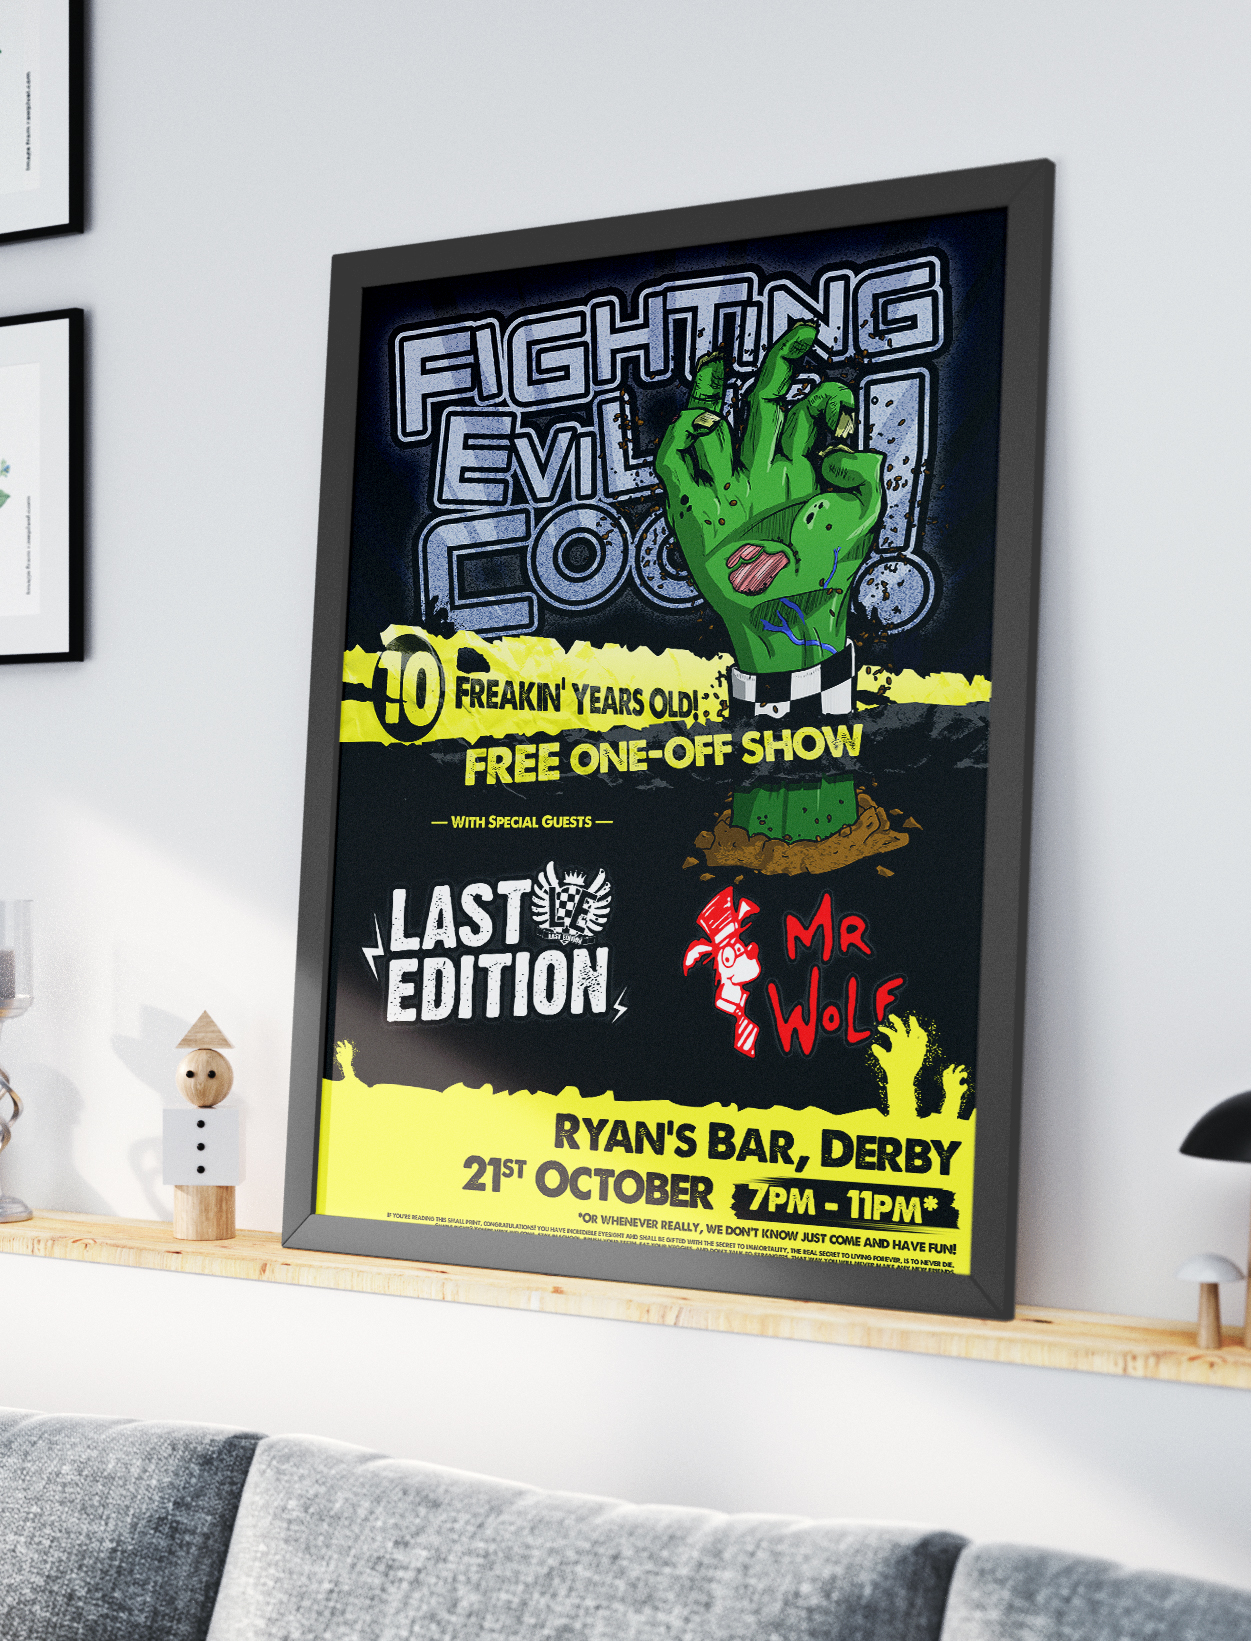 Gig poster for a local ska band 'Fighting Evil Is Cool!'.